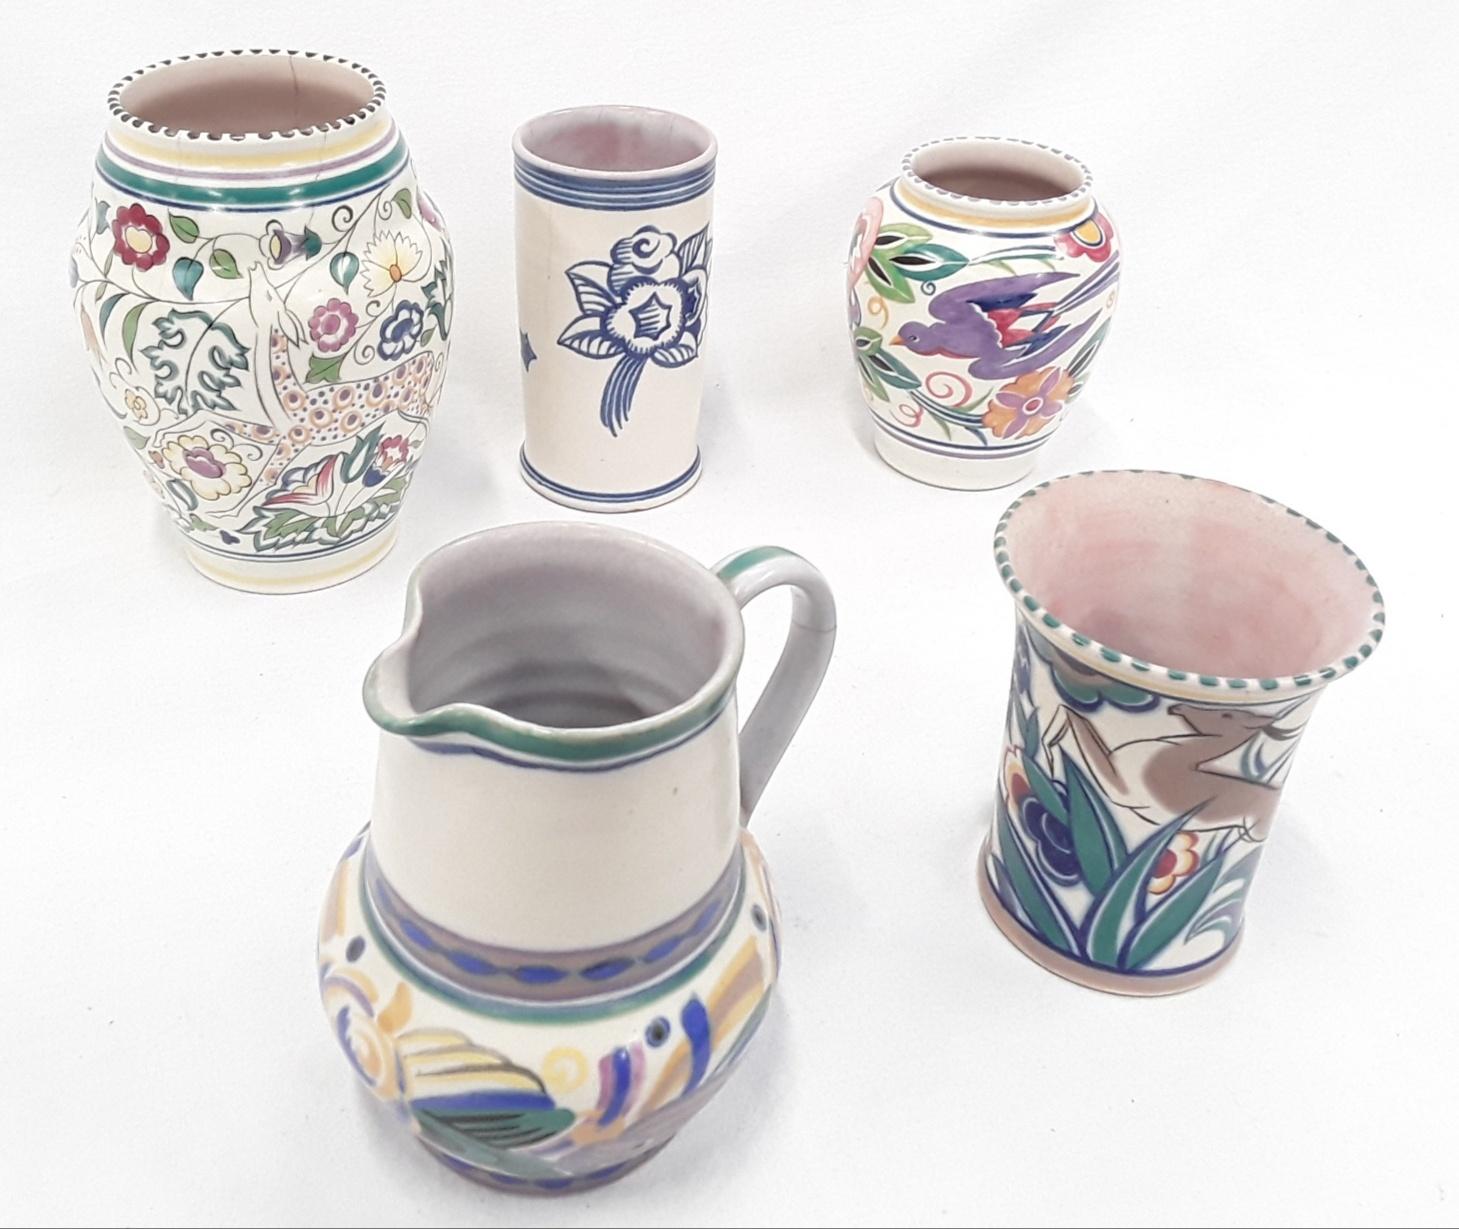 Poole Pottery SK pattern vase, together with 4 other traditional vases (5) - please examine.